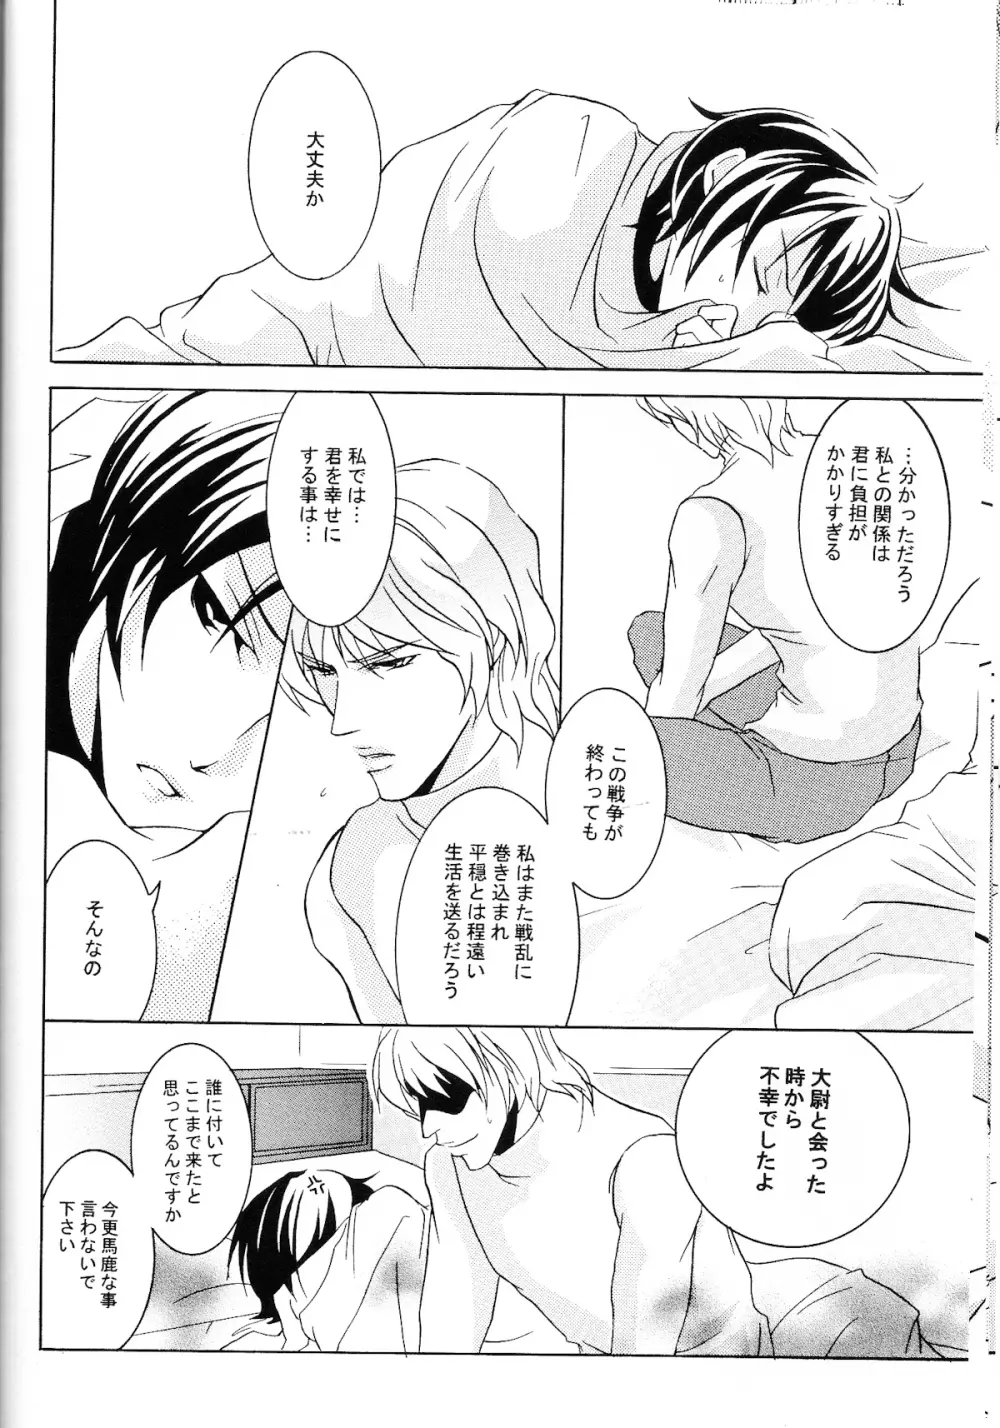 REPLAY 108 再録本 - page60